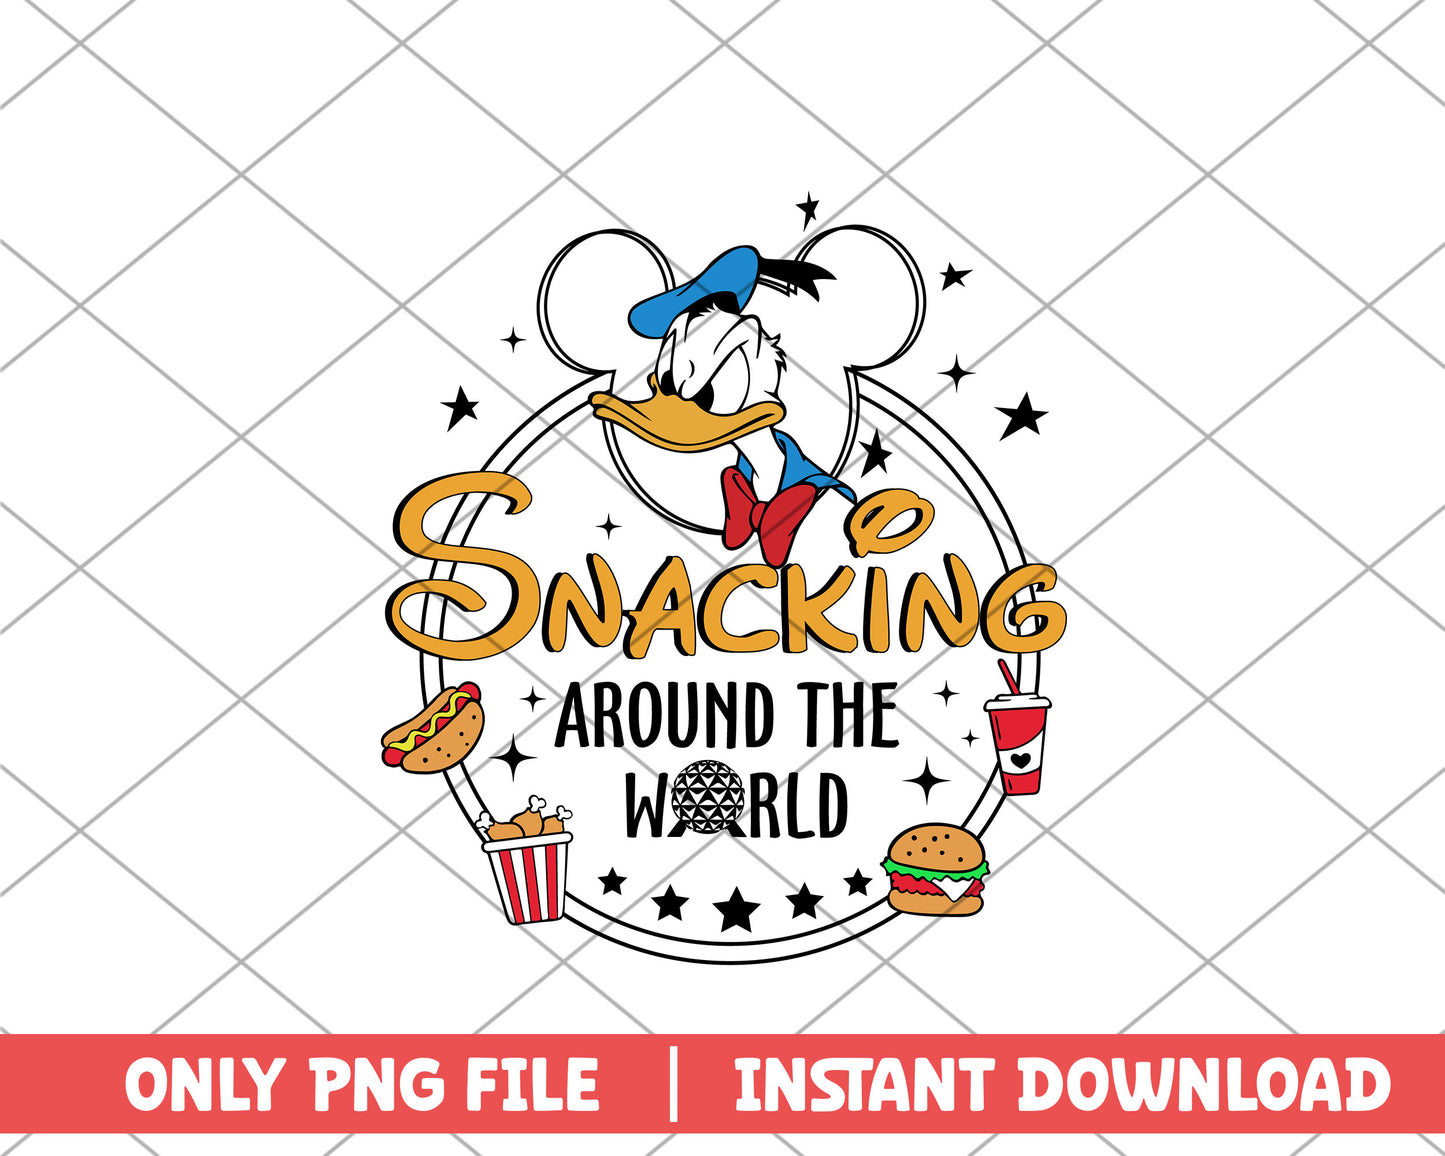 Snacking around the world donald disney png